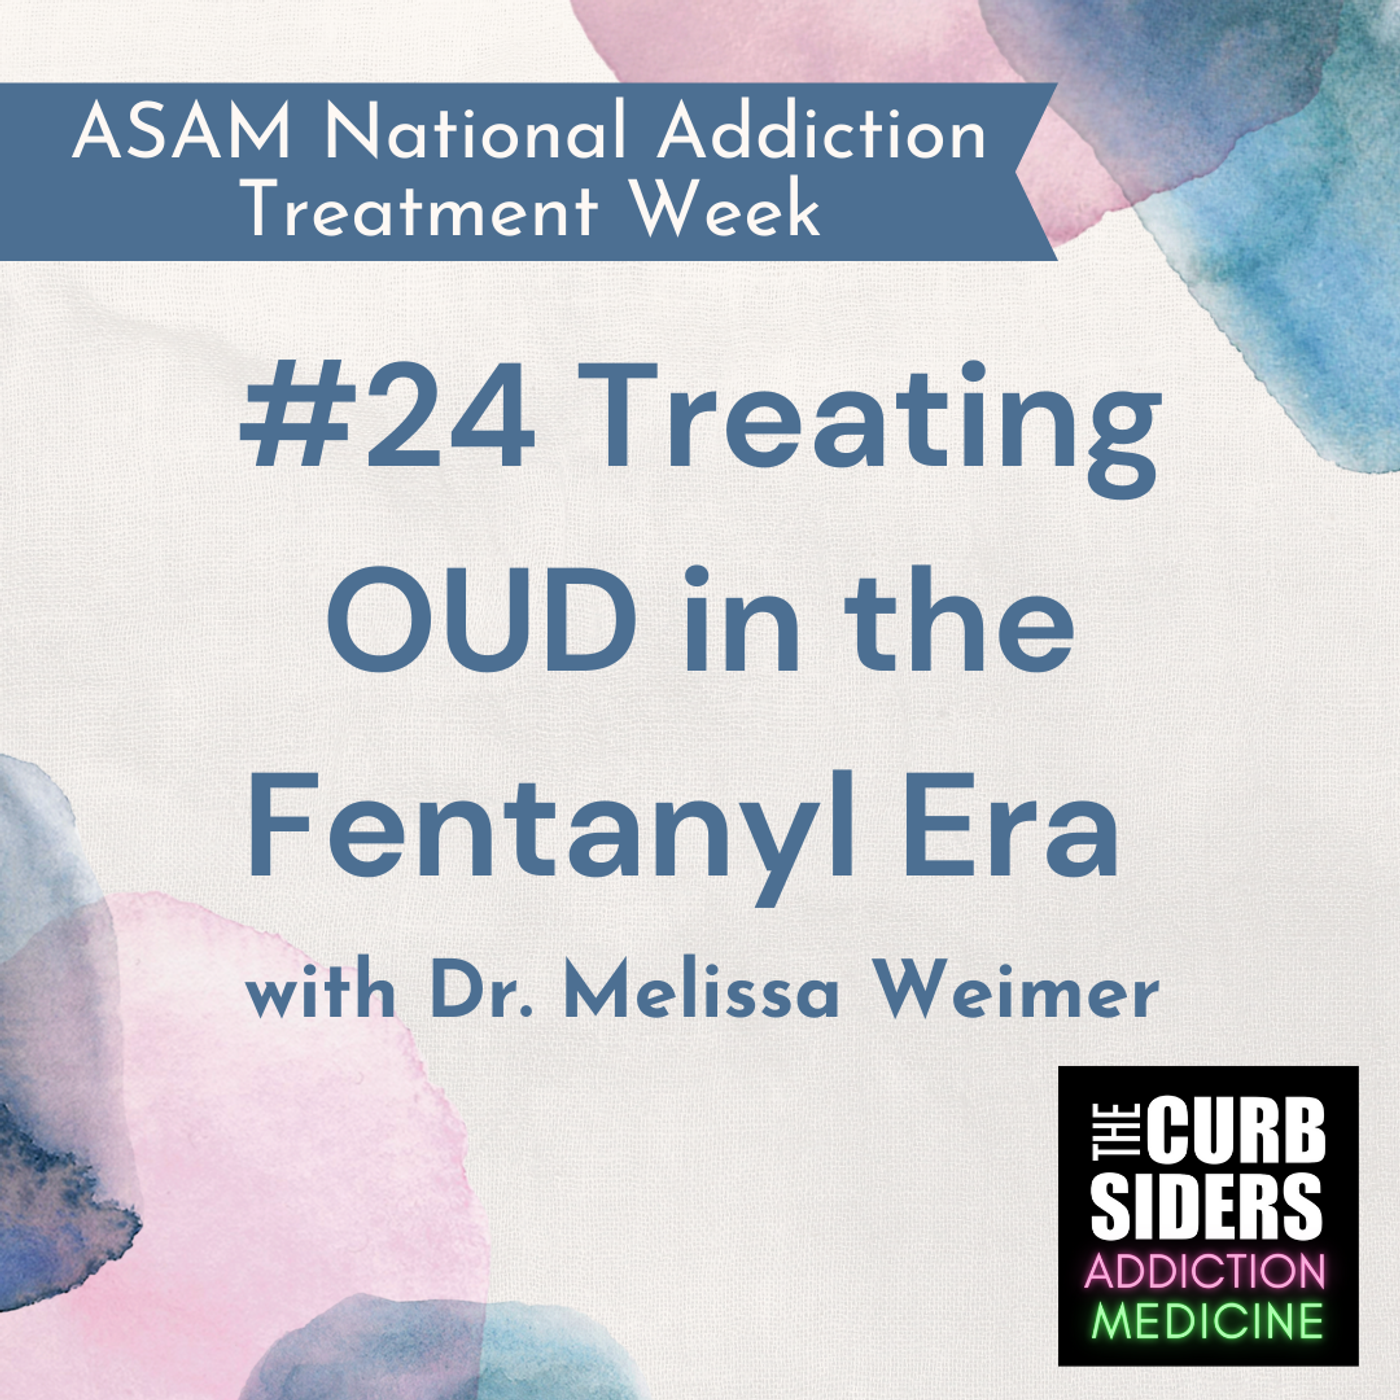 S2 Ep13: #24 Treating OUD in the Fentanyl Era:  ASAM Treatment Week with Dr. Melissa Weimer